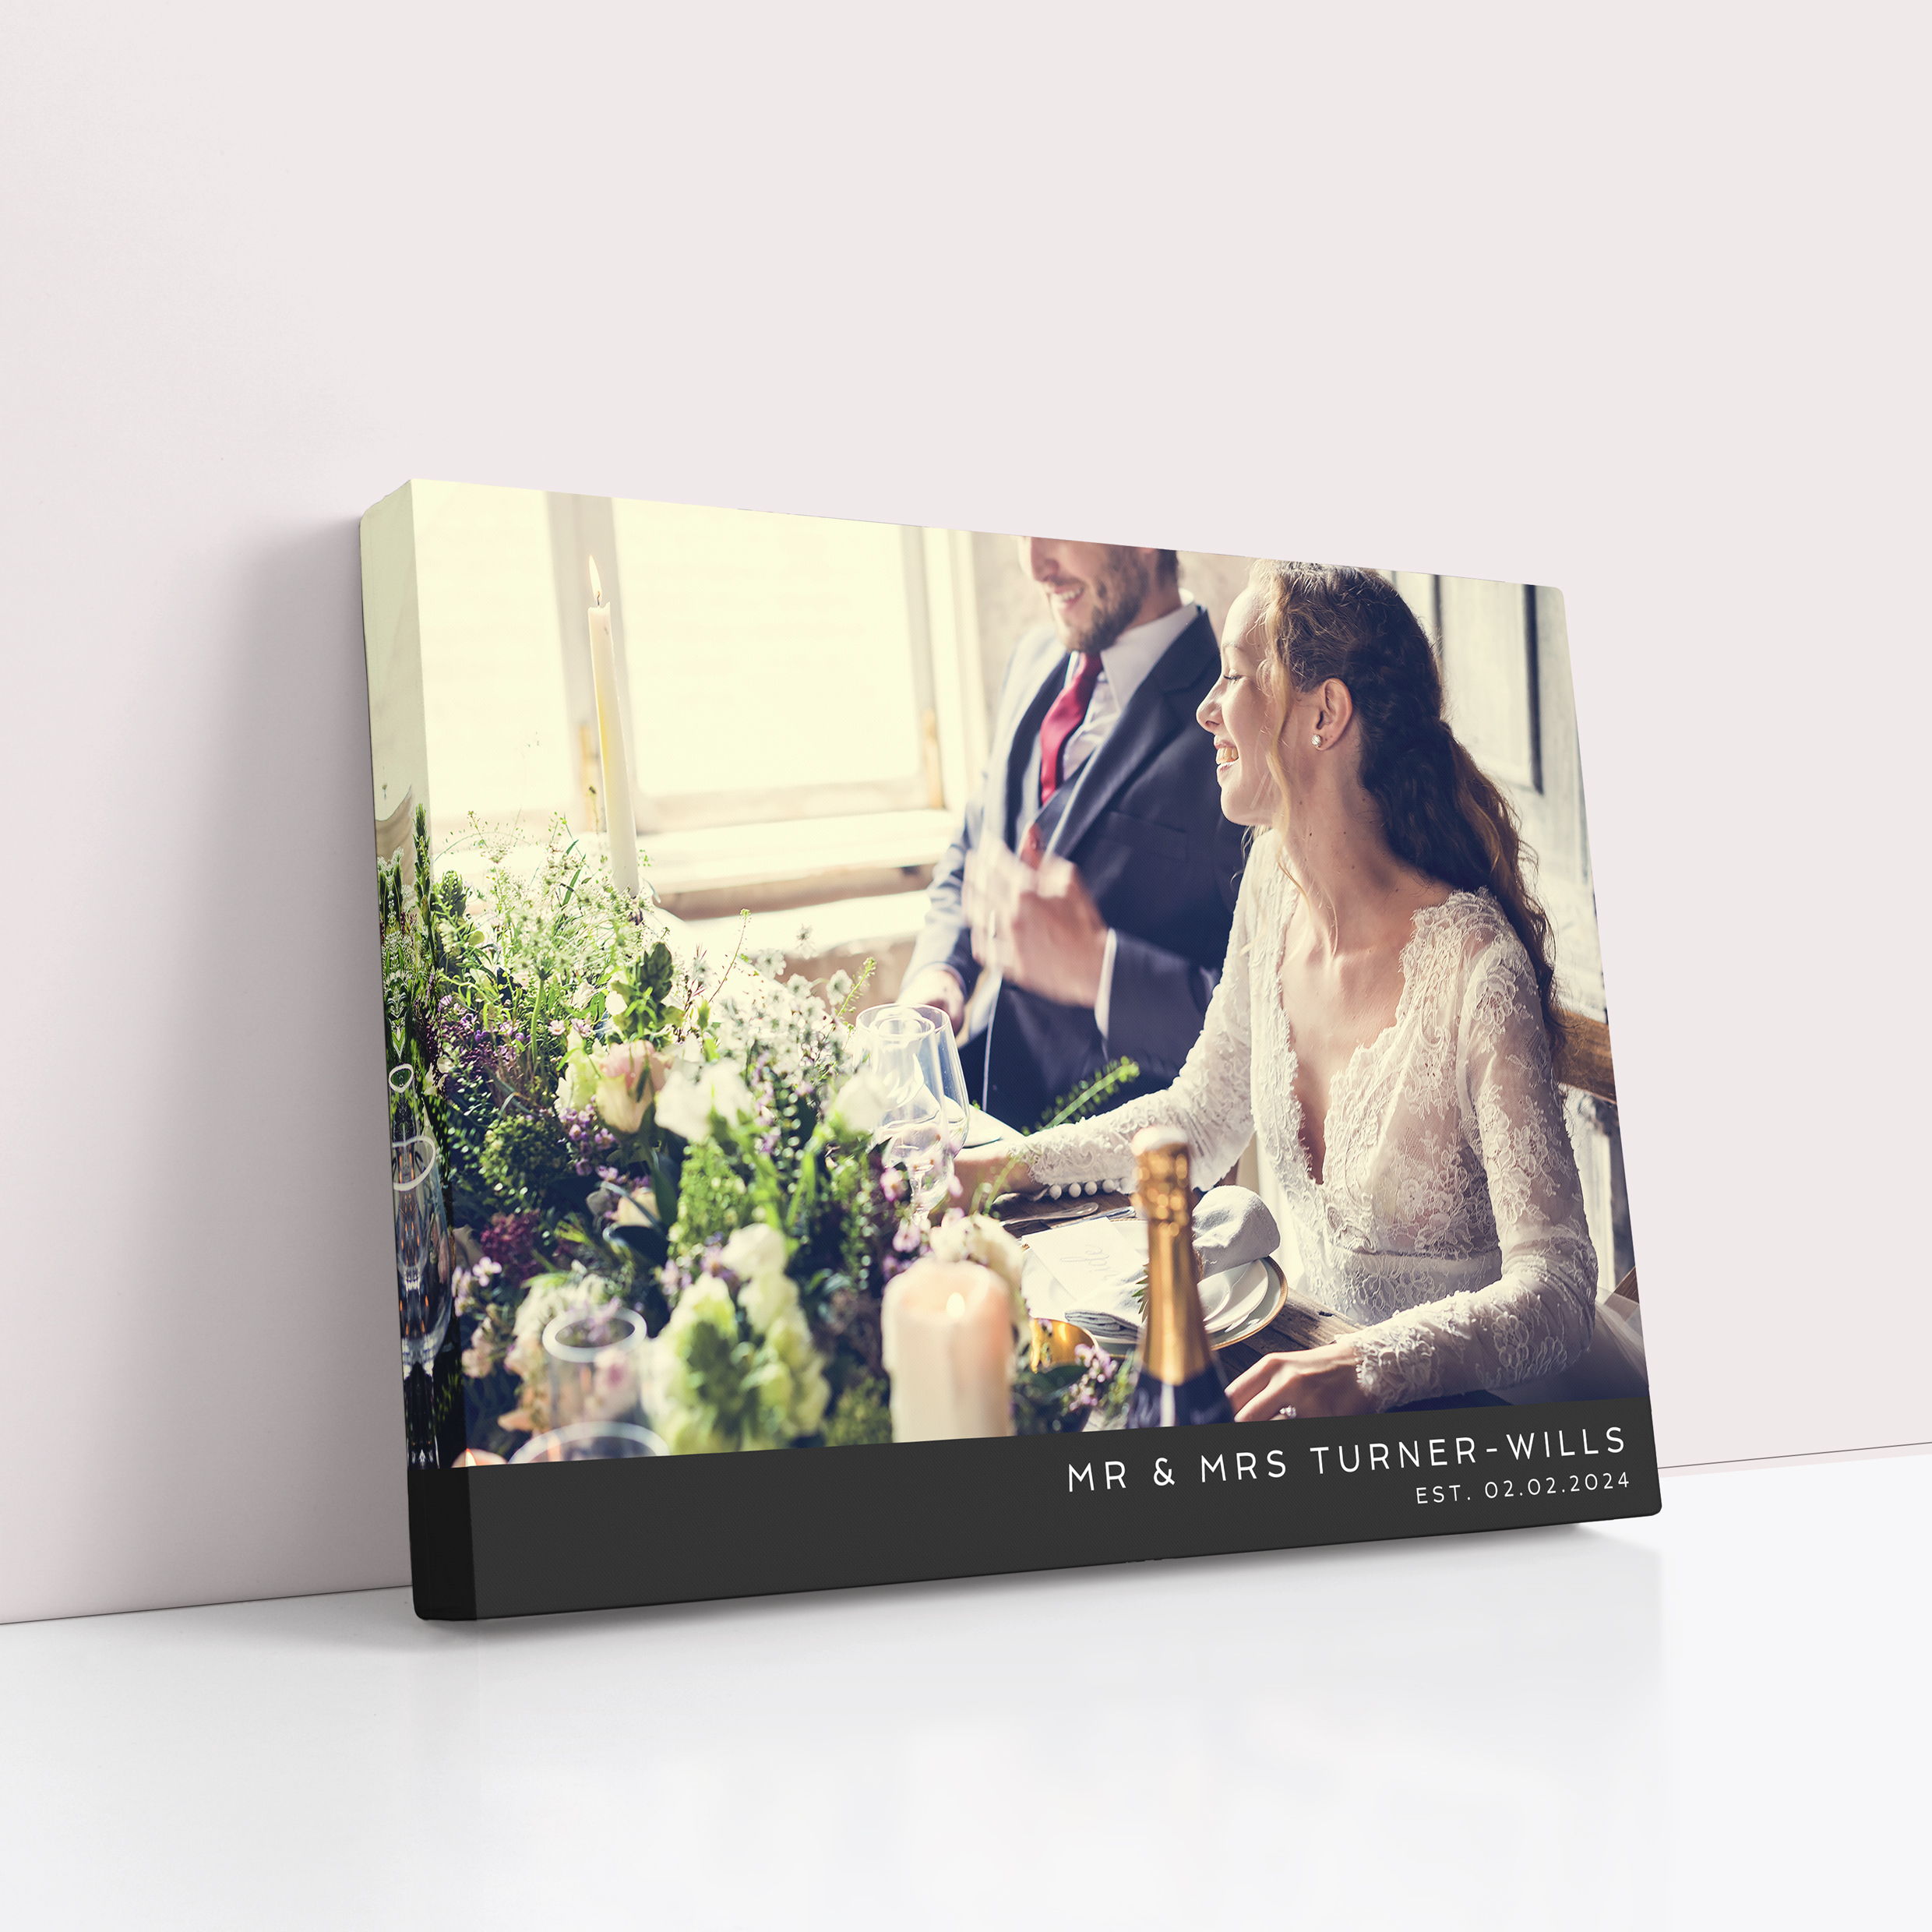  Personalized Wedding Bliss Stretch Canvas Print - Capture the Magic of Your Wedding Day